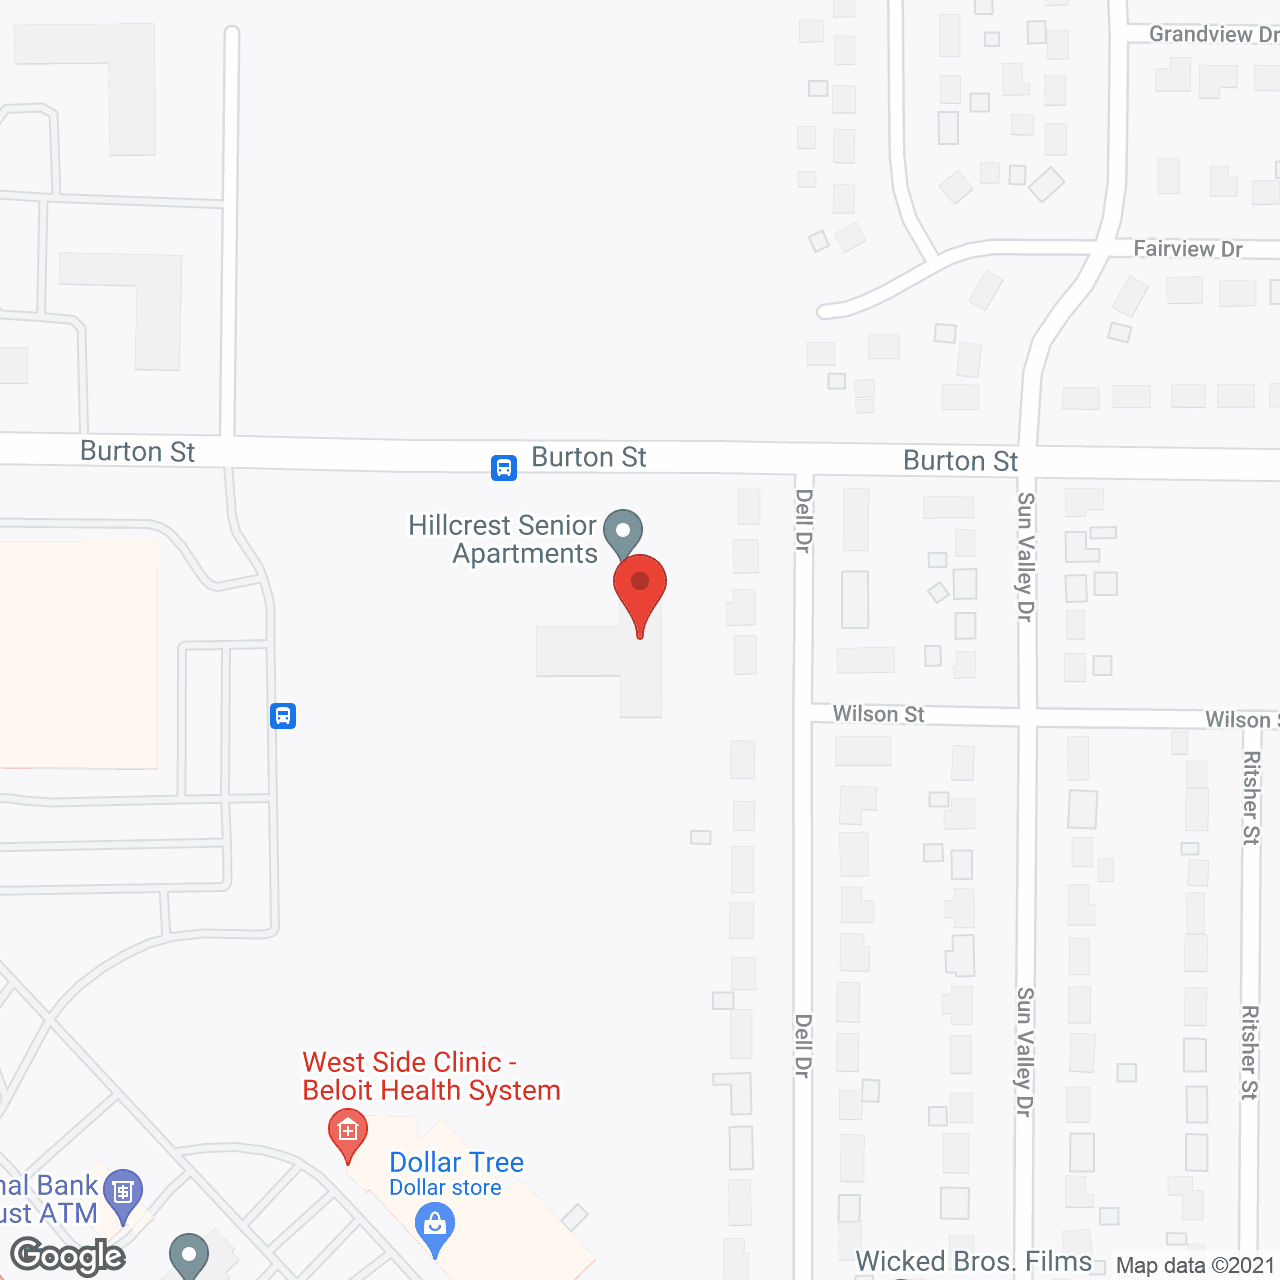 Hillcrest in google map